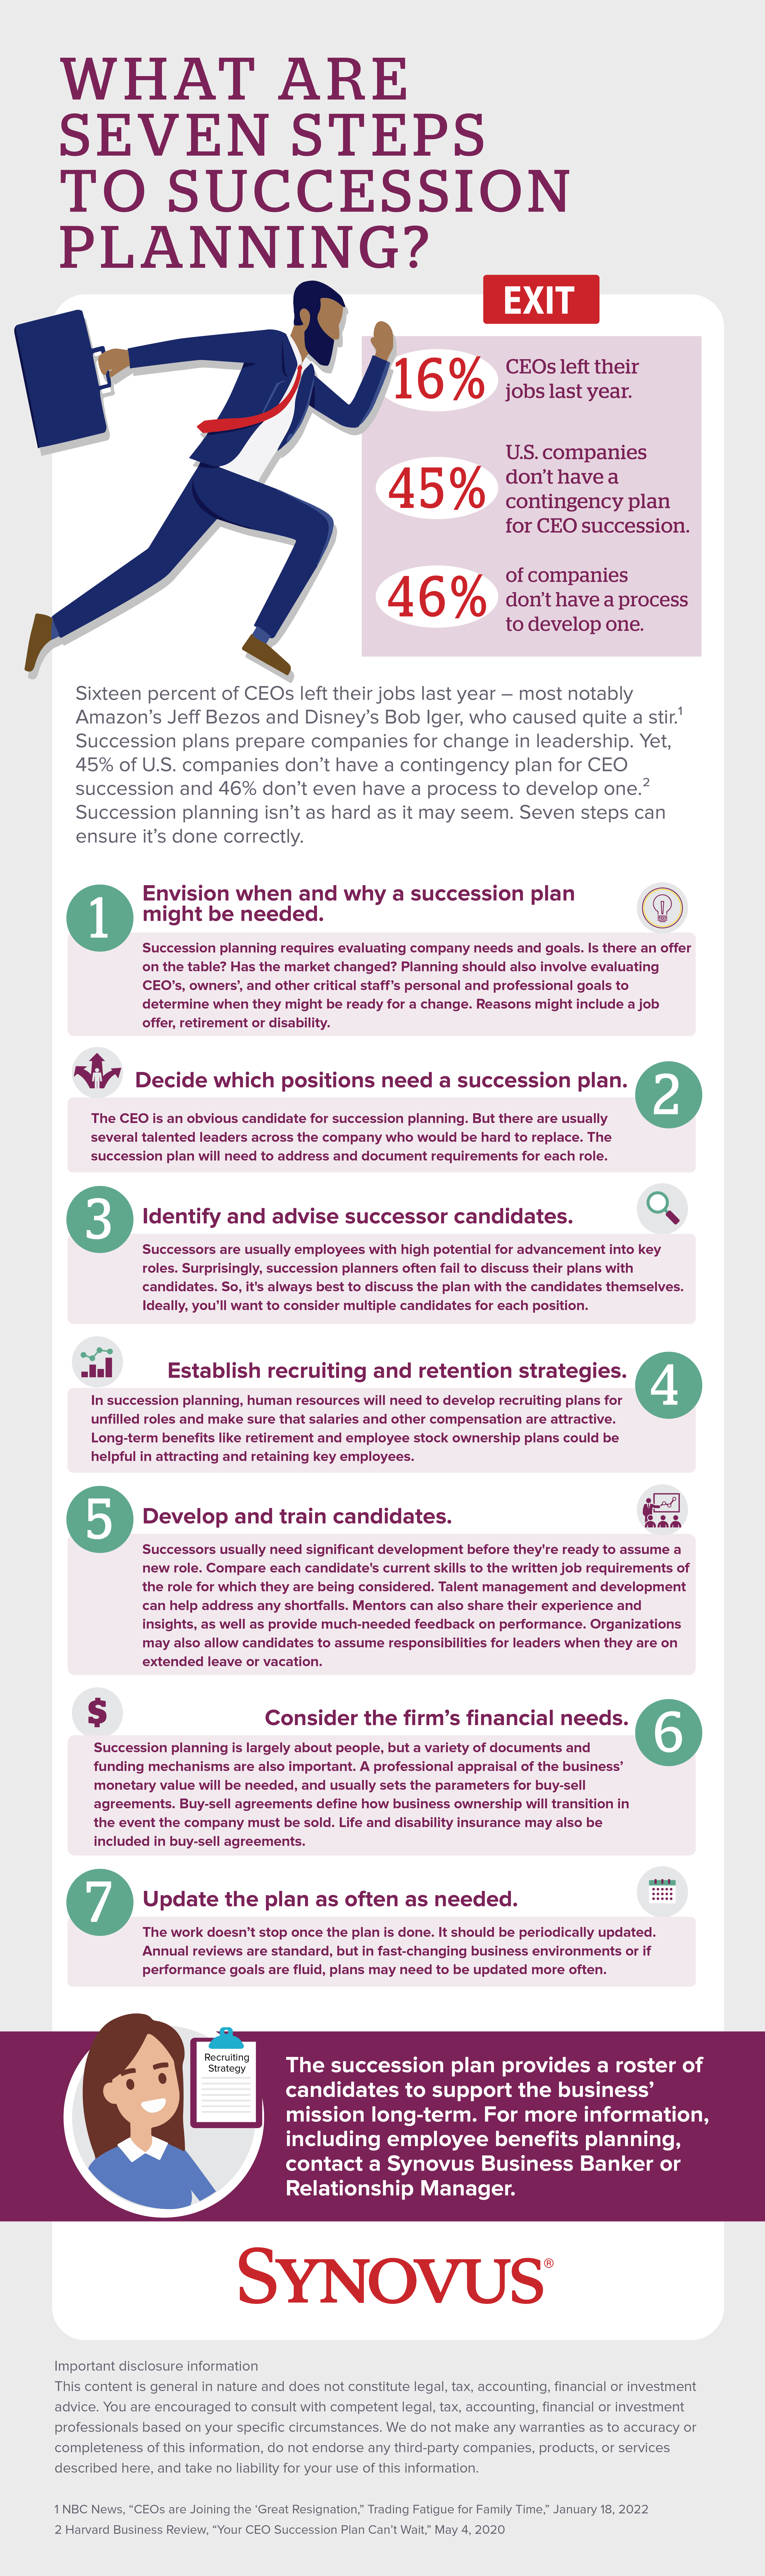 Infographic describing 7 steps to succession planning. A full description is available through a link beneath the image.